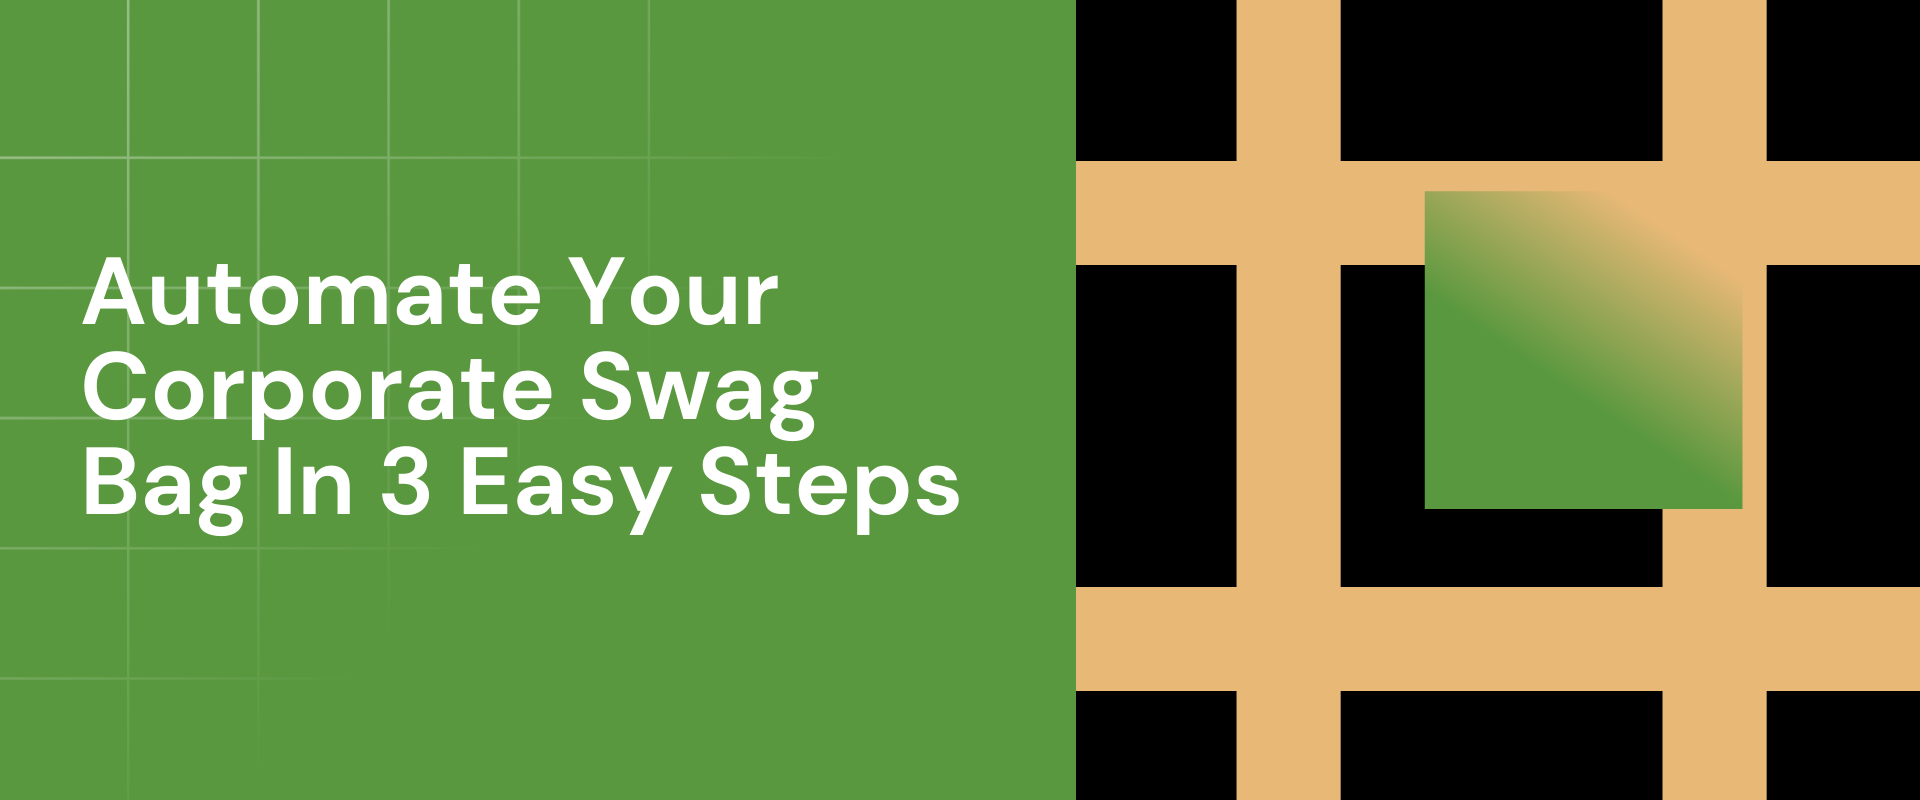 Automate Your Corporate Swag Bag In 3 Easy Steps